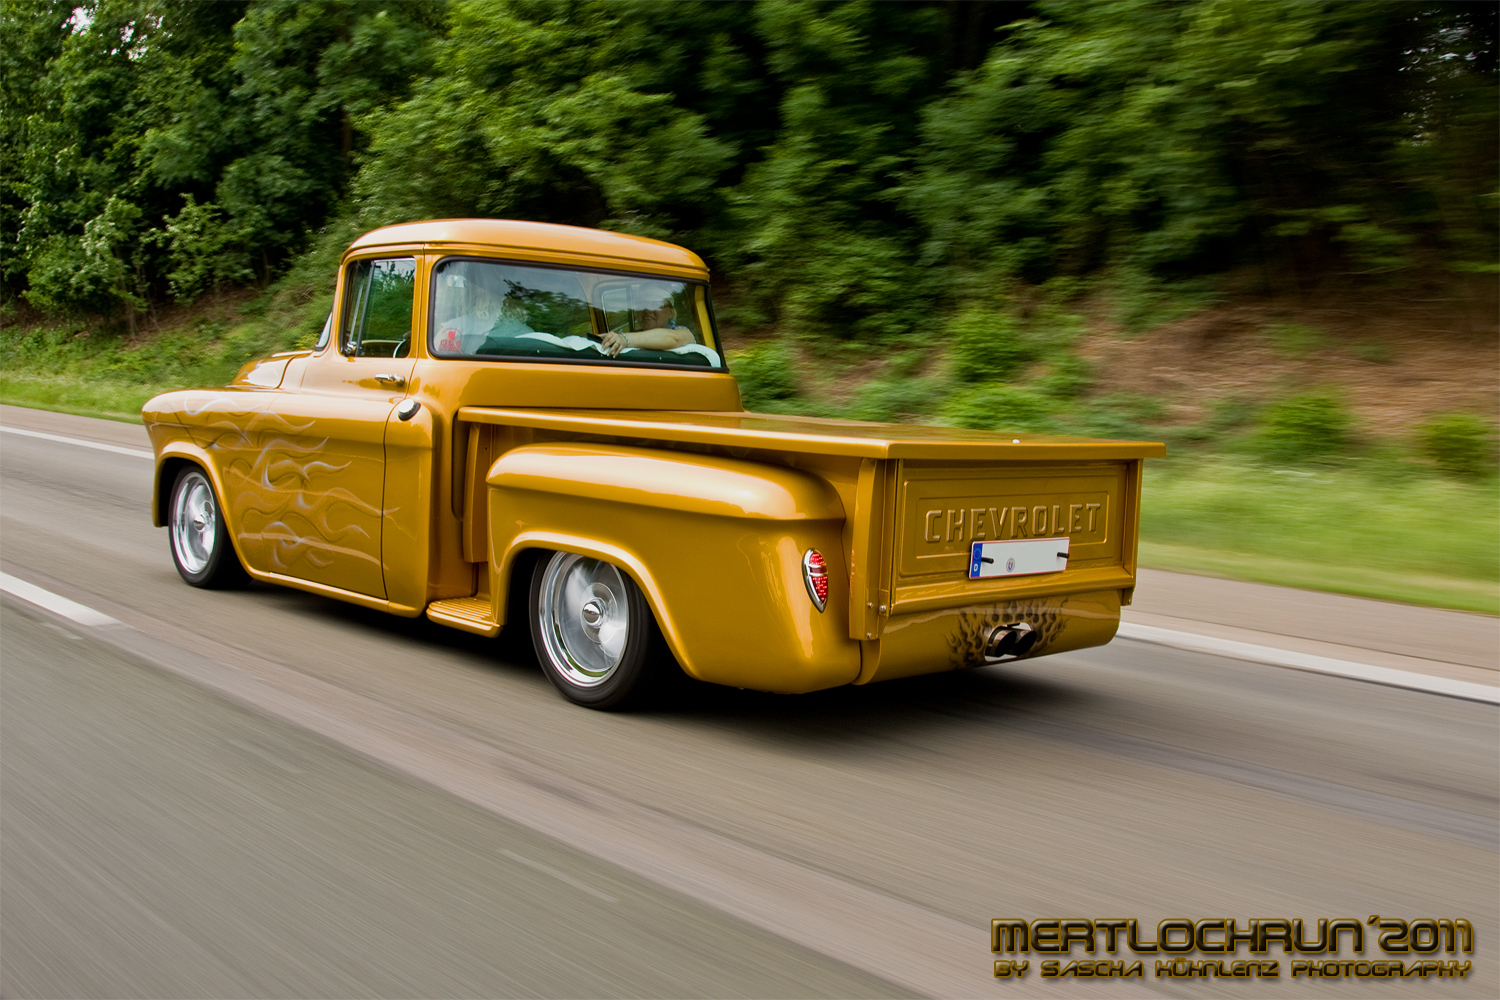 57er Chevy Pickup II (on the way to Mertloch)